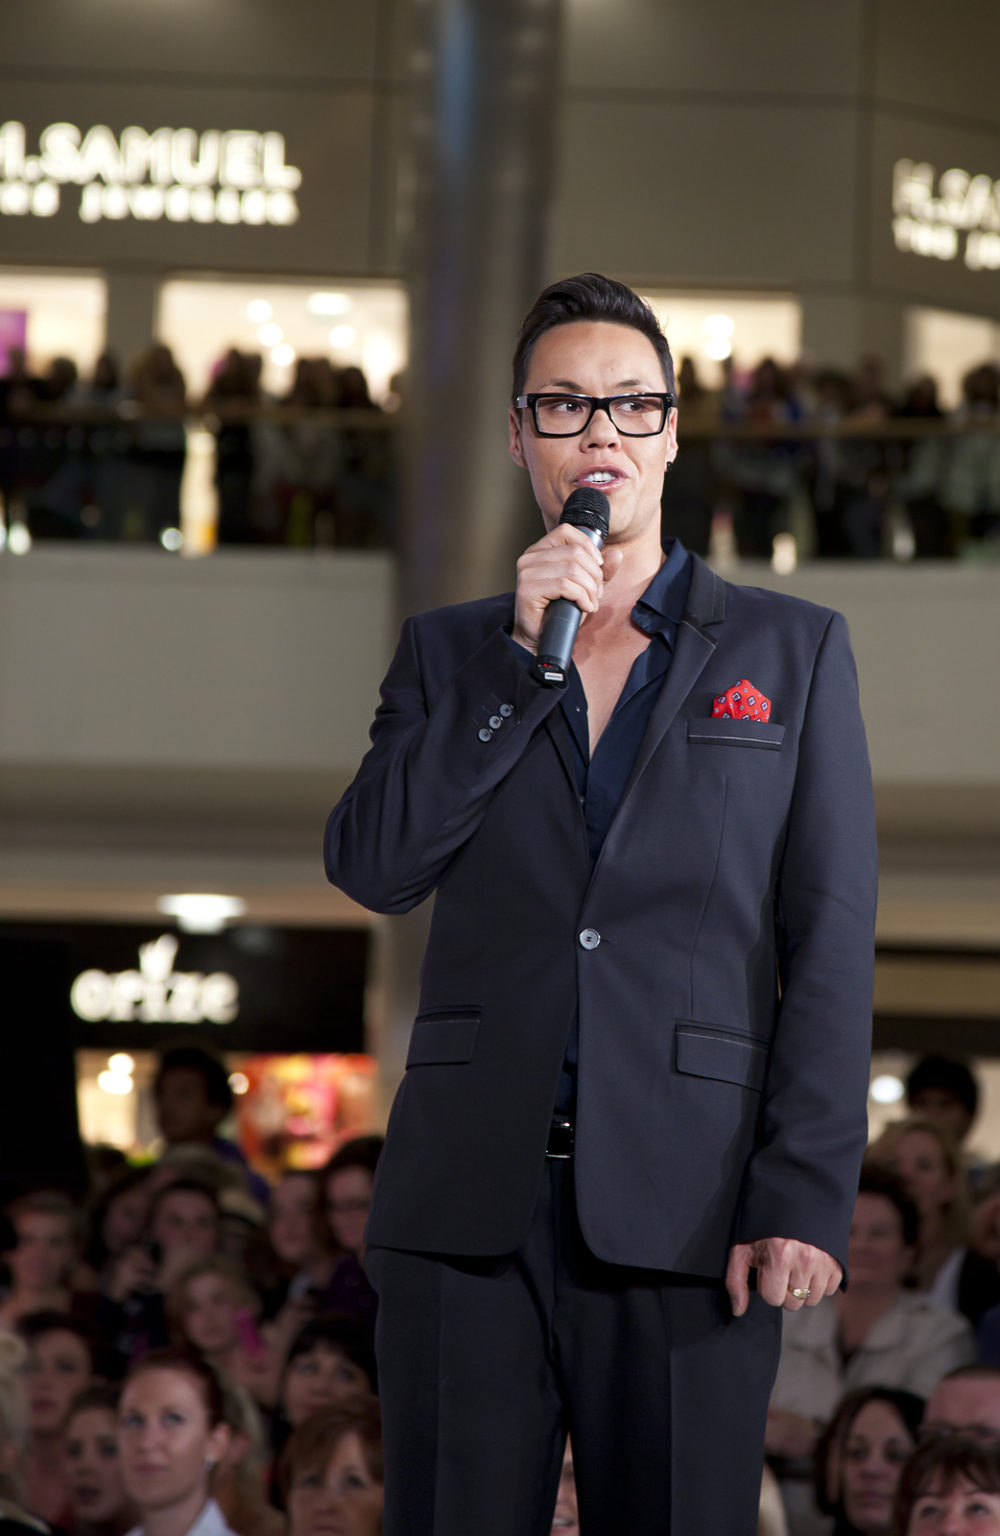 Gok Wan | Tackle homophobic bullying in the playground